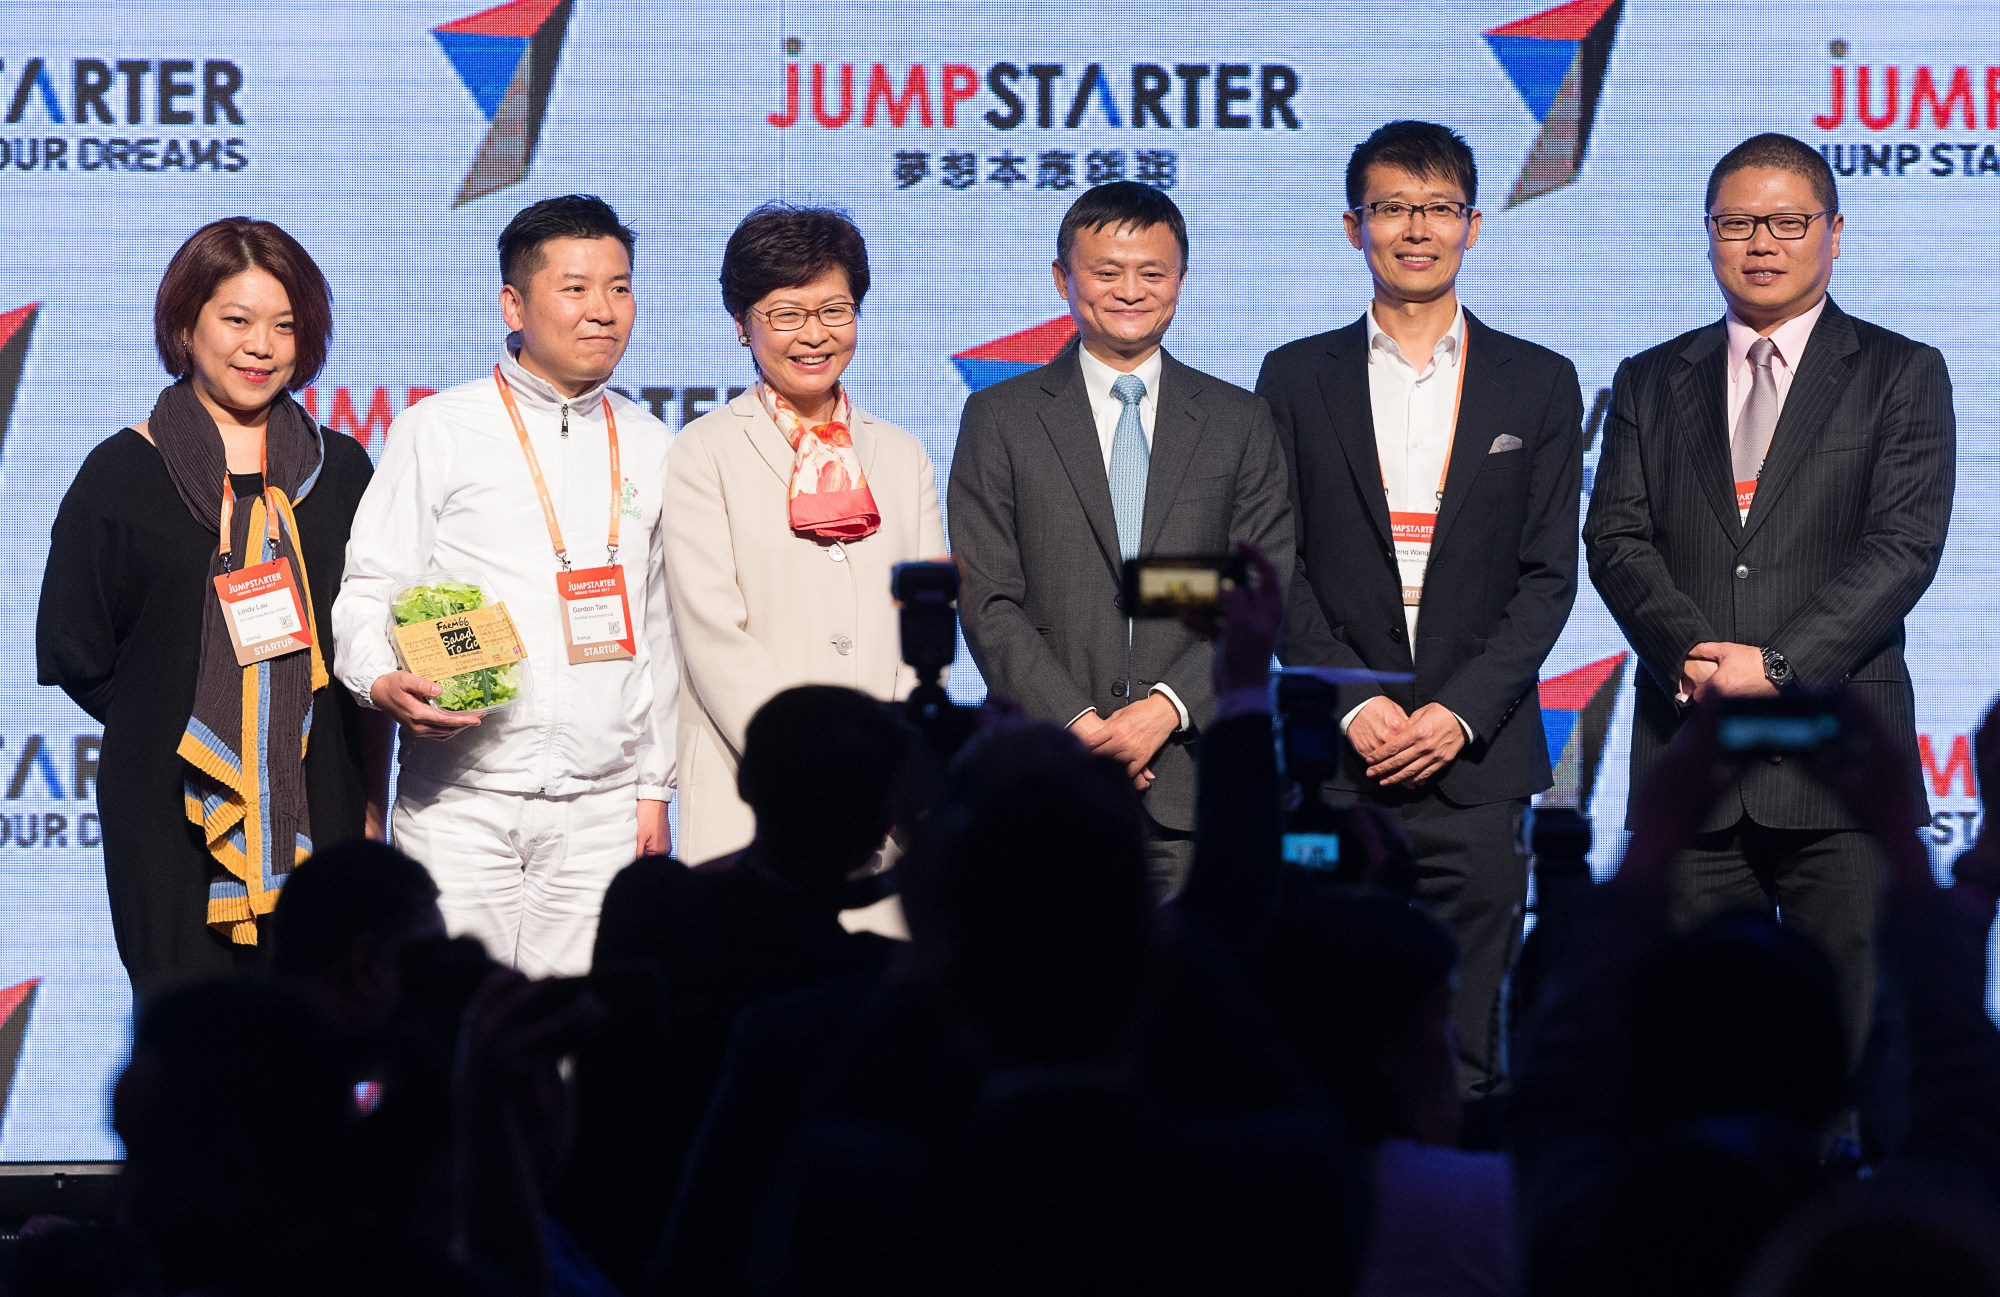 Three from 600 startup pitches gain Jack Ma and Alibaba's backing